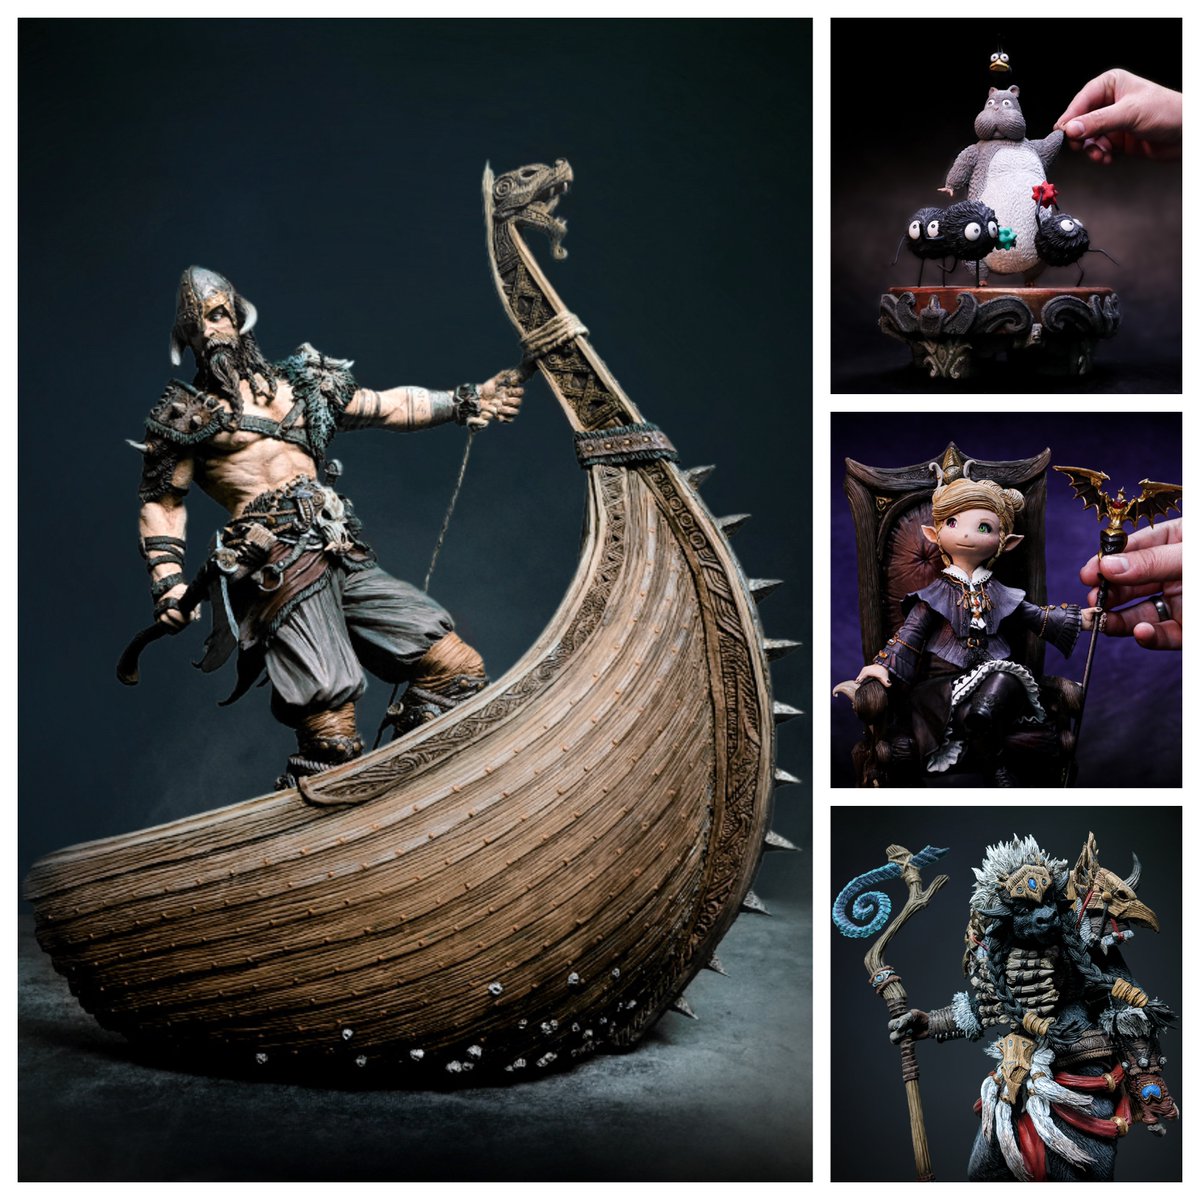 NEW BLOG! Storytelling through Sculpture - The Art of Christopher Notbusch: bit.ly/SiegeGiantTW Images: Some of the characters Christopher created live on Twitch - Viking, Boh Mouse and Bird, Lalafell from Final Fantasy XIV, and Tauren Shaman from World of Warcraft.